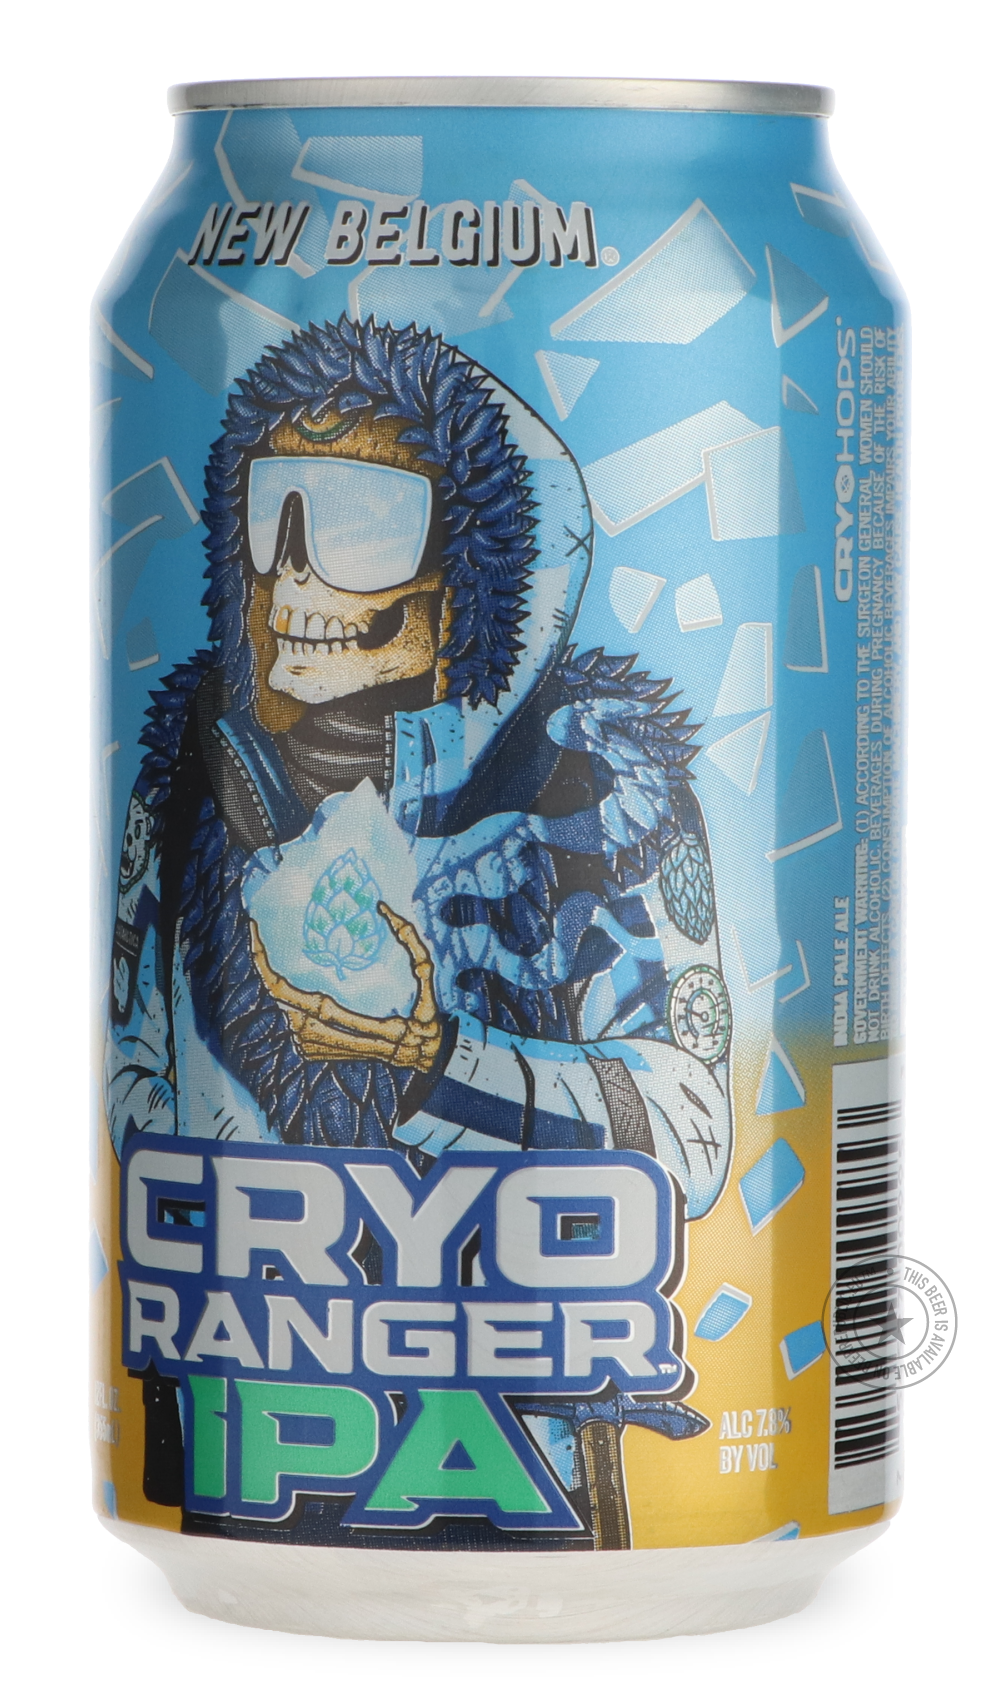 -New Belgium- Voodoo Ranger Cryo Ranger IPA-IPA- Only @ Beer Republic - The best online beer store for American & Canadian craft beer - Buy beer online from the USA and Canada - Bier online kopen - Amerikaans bier kopen - Craft beer store - Craft beer kopen - Amerikanisch bier kaufen - Bier online kaufen - Acheter biere online - IPA - Stout - Porter - New England IPA - Hazy IPA - Imperial Stout - Barrel Aged - Barrel Aged Imperial Stout - Brown - Dark beer - Blond - Blonde - Pilsner - Lager - Wheat - Weizen